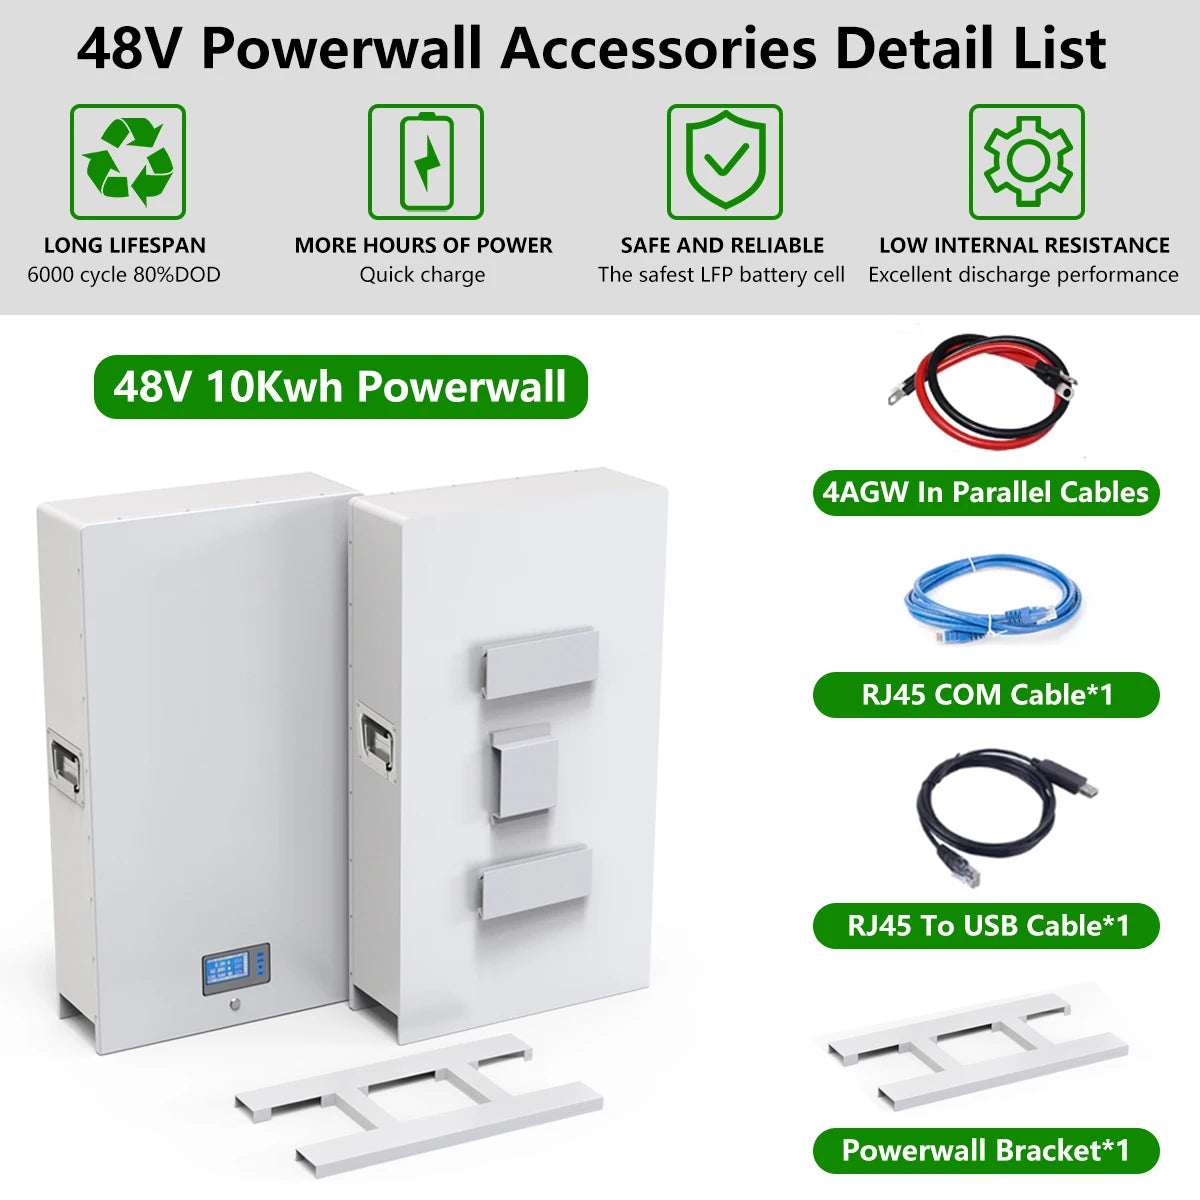 48V 200Ah Powerwall - 10Kwh LiFePO4 Battery, 48V Powerwall accessory with reliable performance and long lifespan features high-quality LFP battery cells.